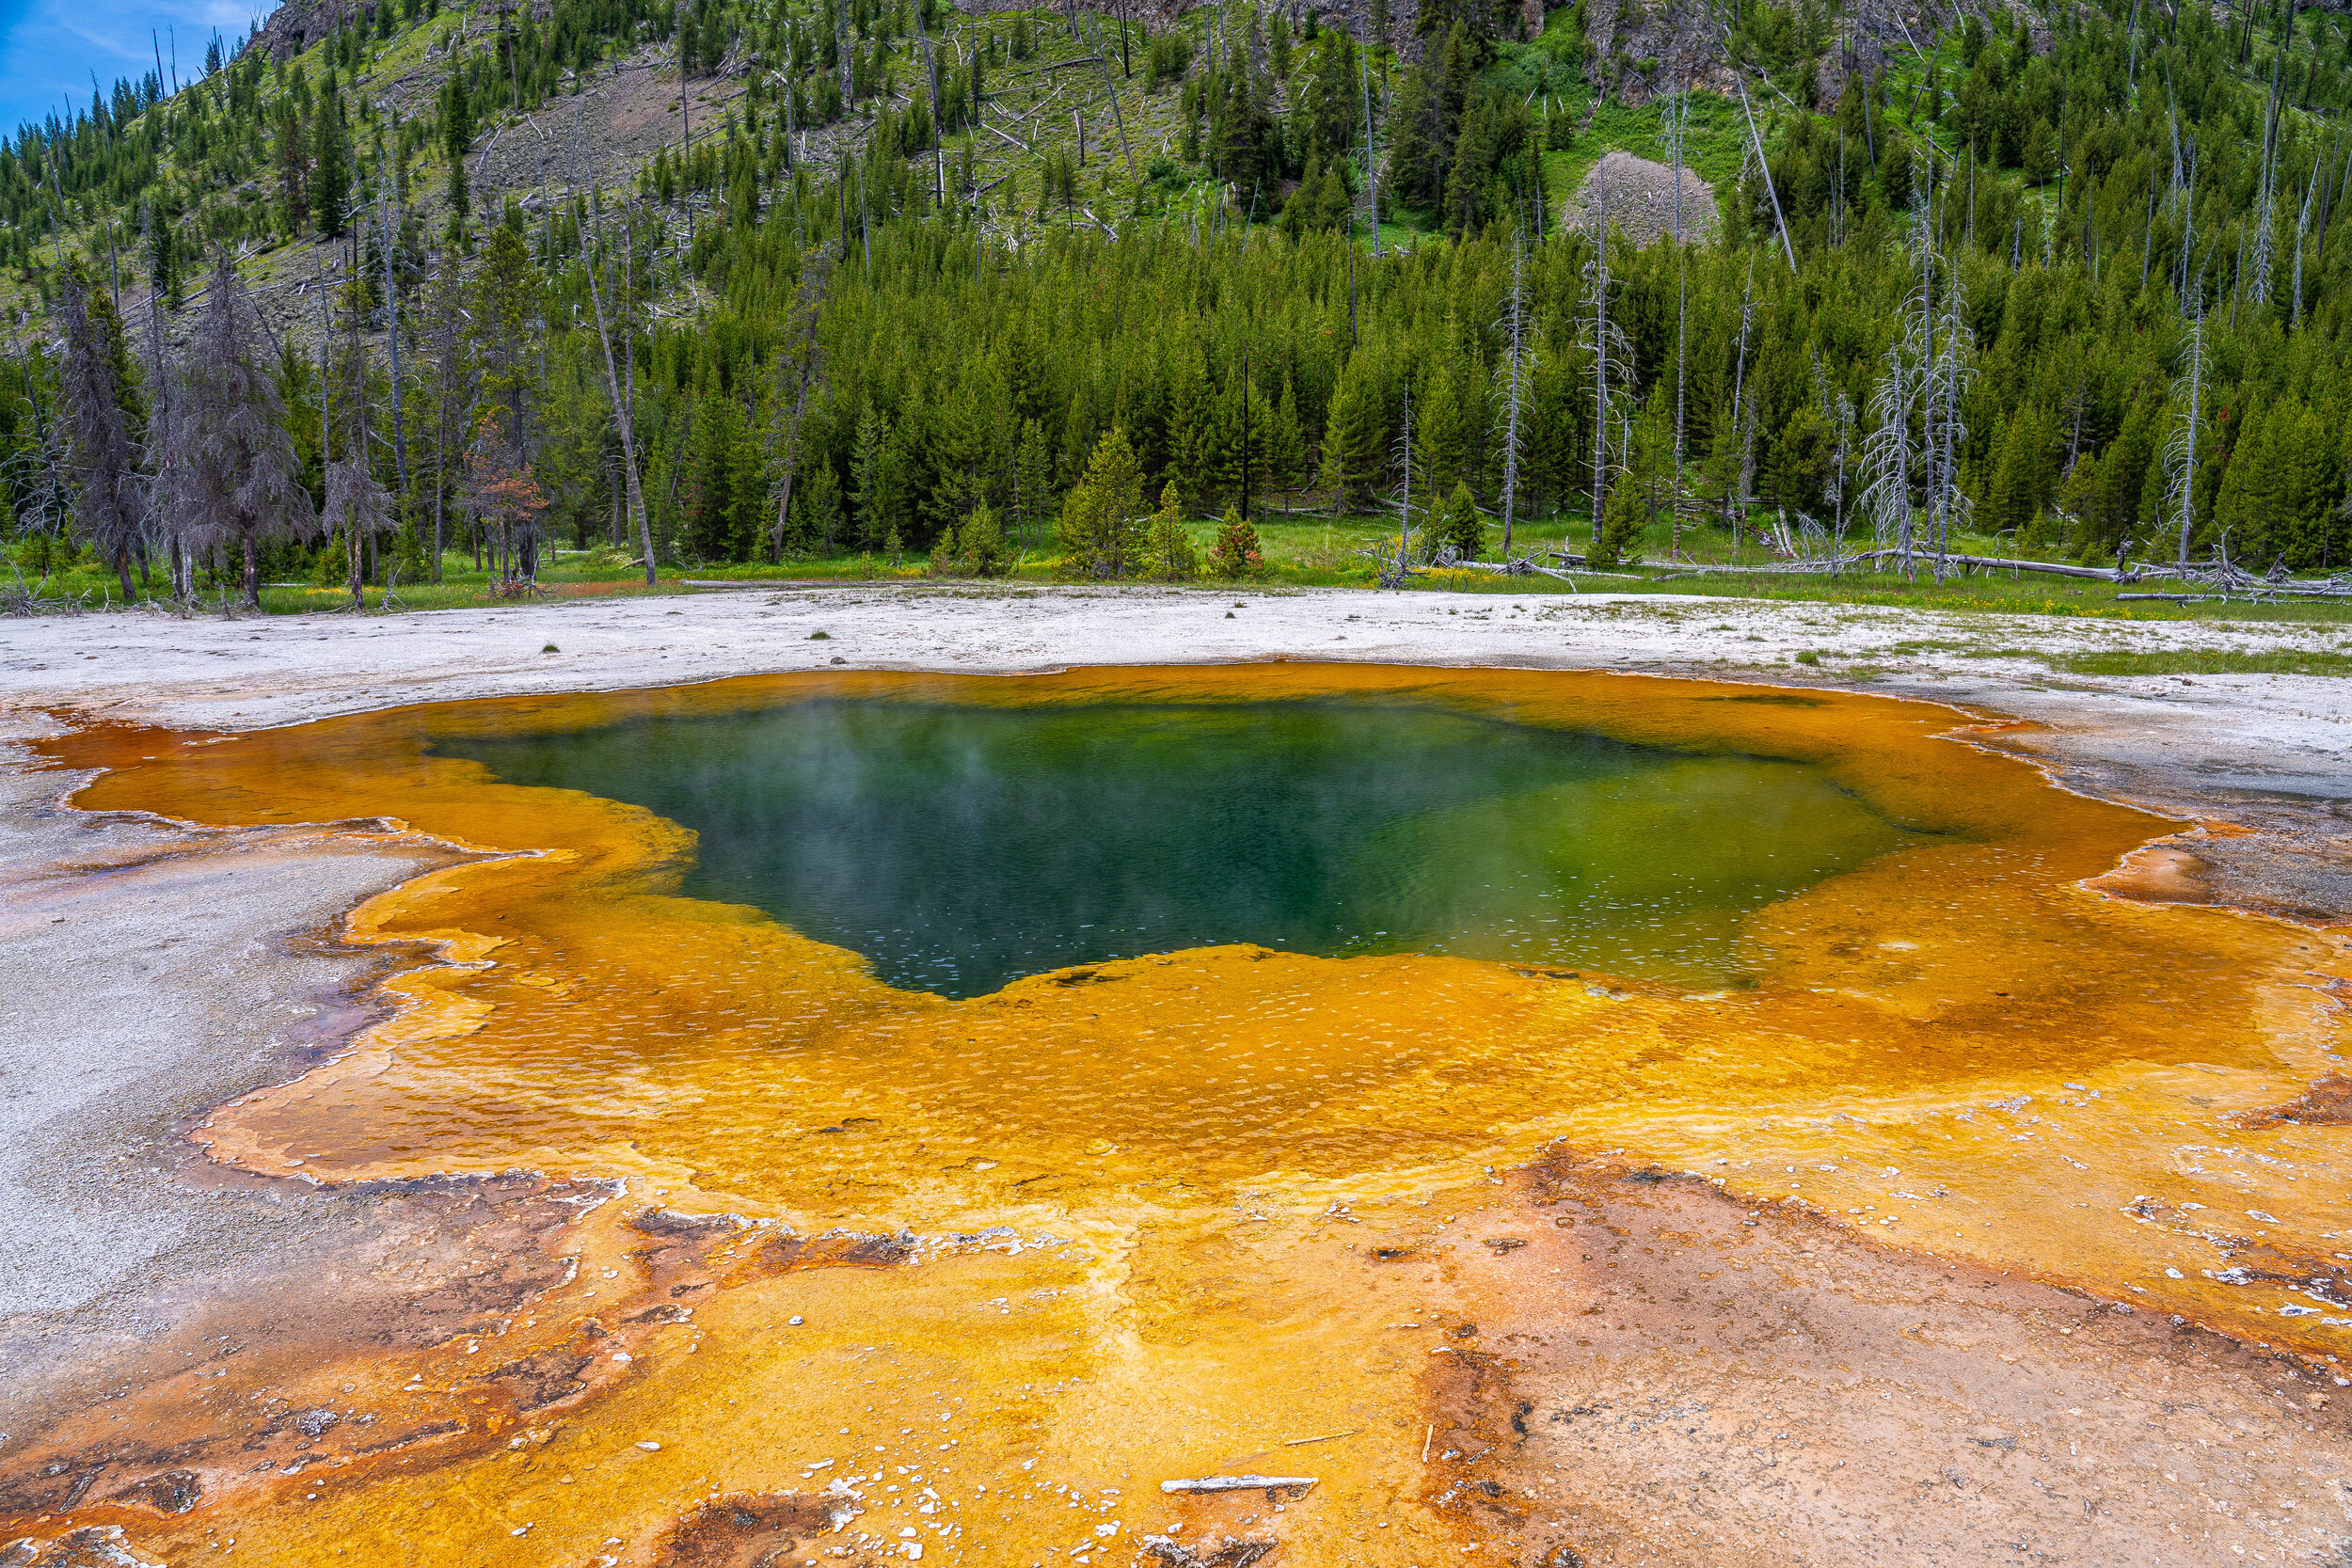  The hot springs and pools at Yellowstone are always a treat to see. Various heat-loving bacteria give the pools their bright and varied colors. Different colors represent different types of bacteria. 